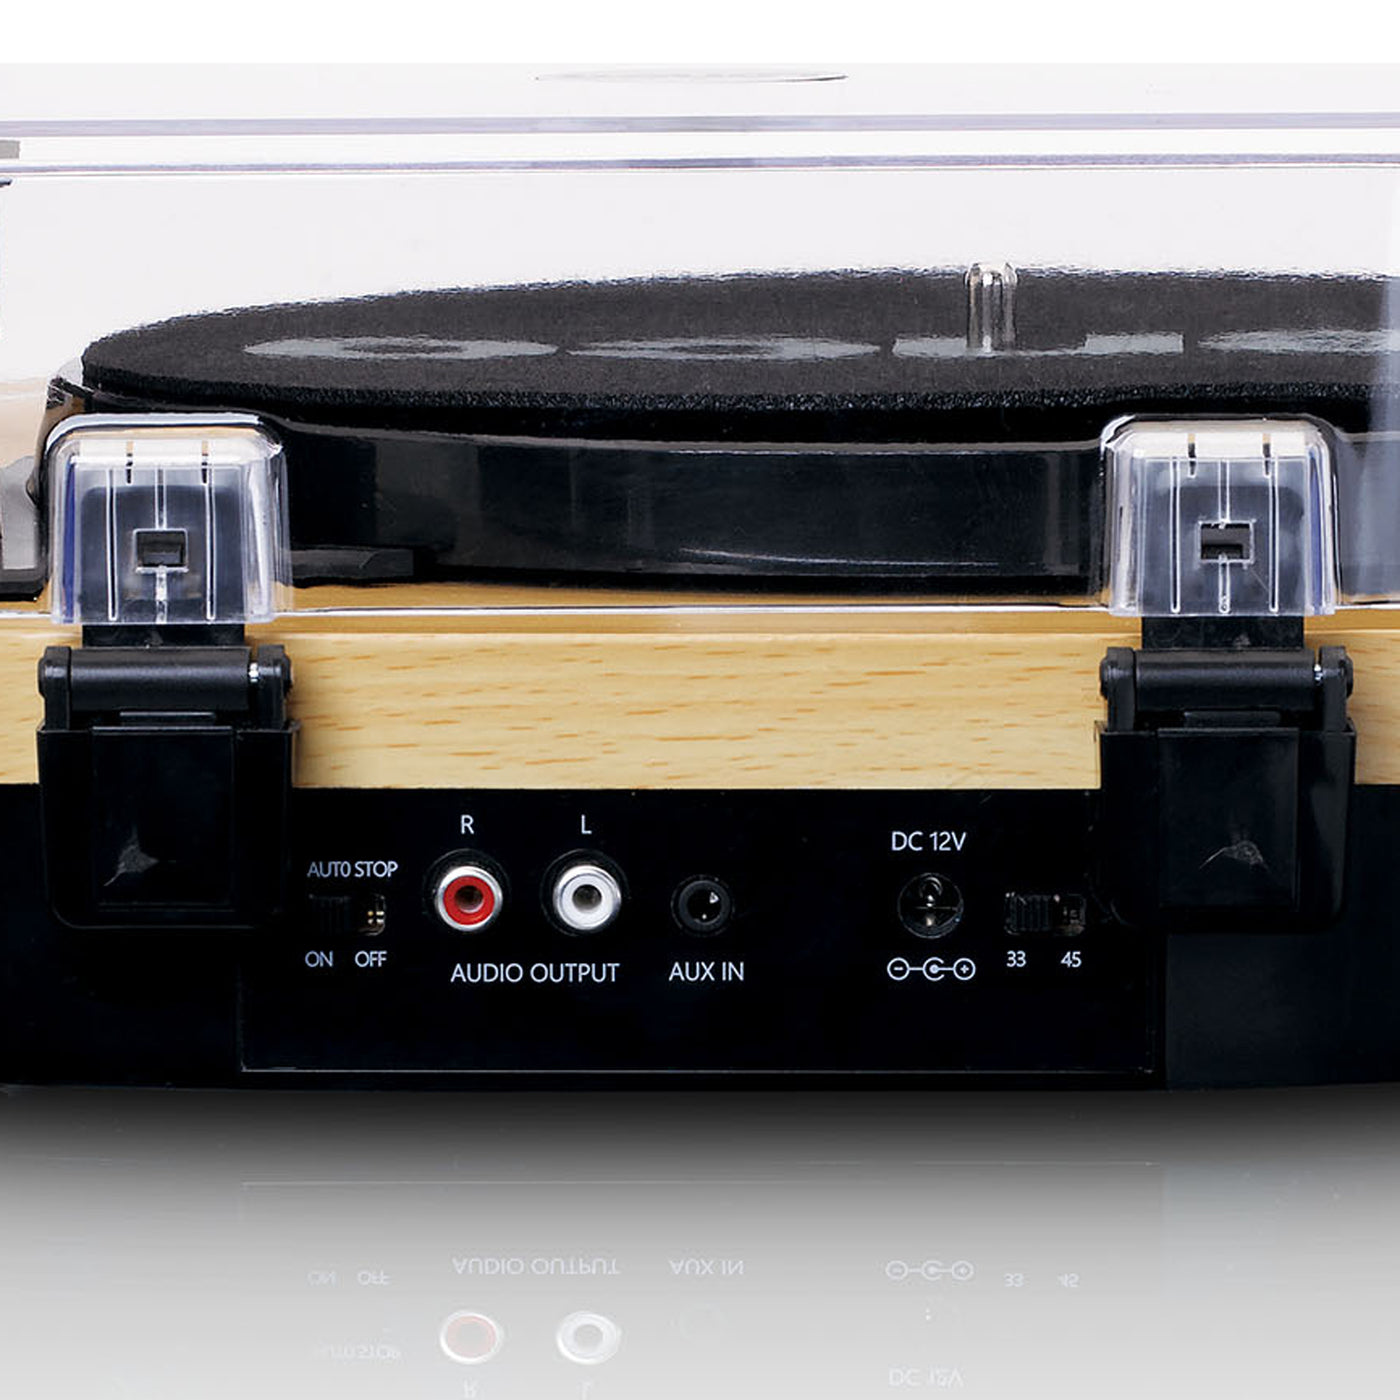 LENCO LS-40WD - Turntable with built-in speakers - Wood